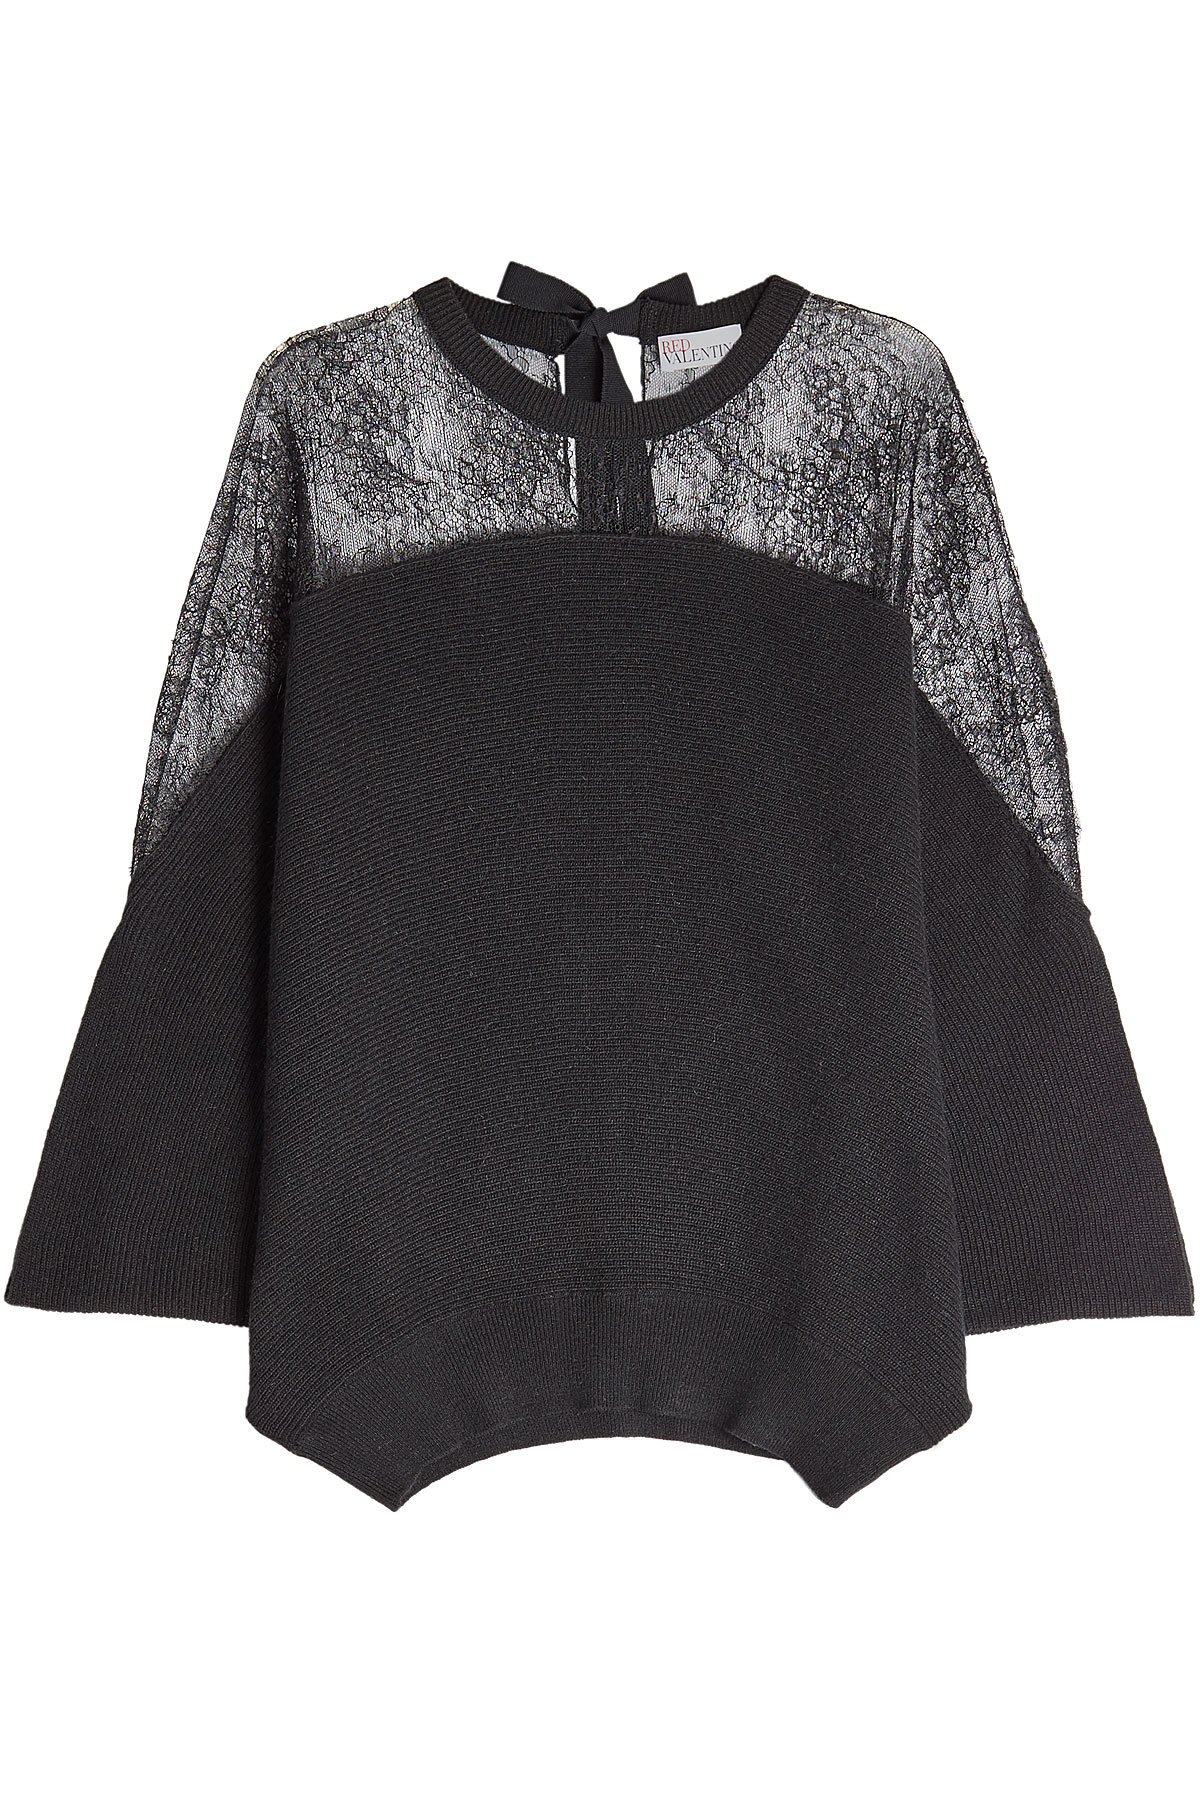 Red Valentino - Pullover with Wool, Angora, Cashmere and Lace